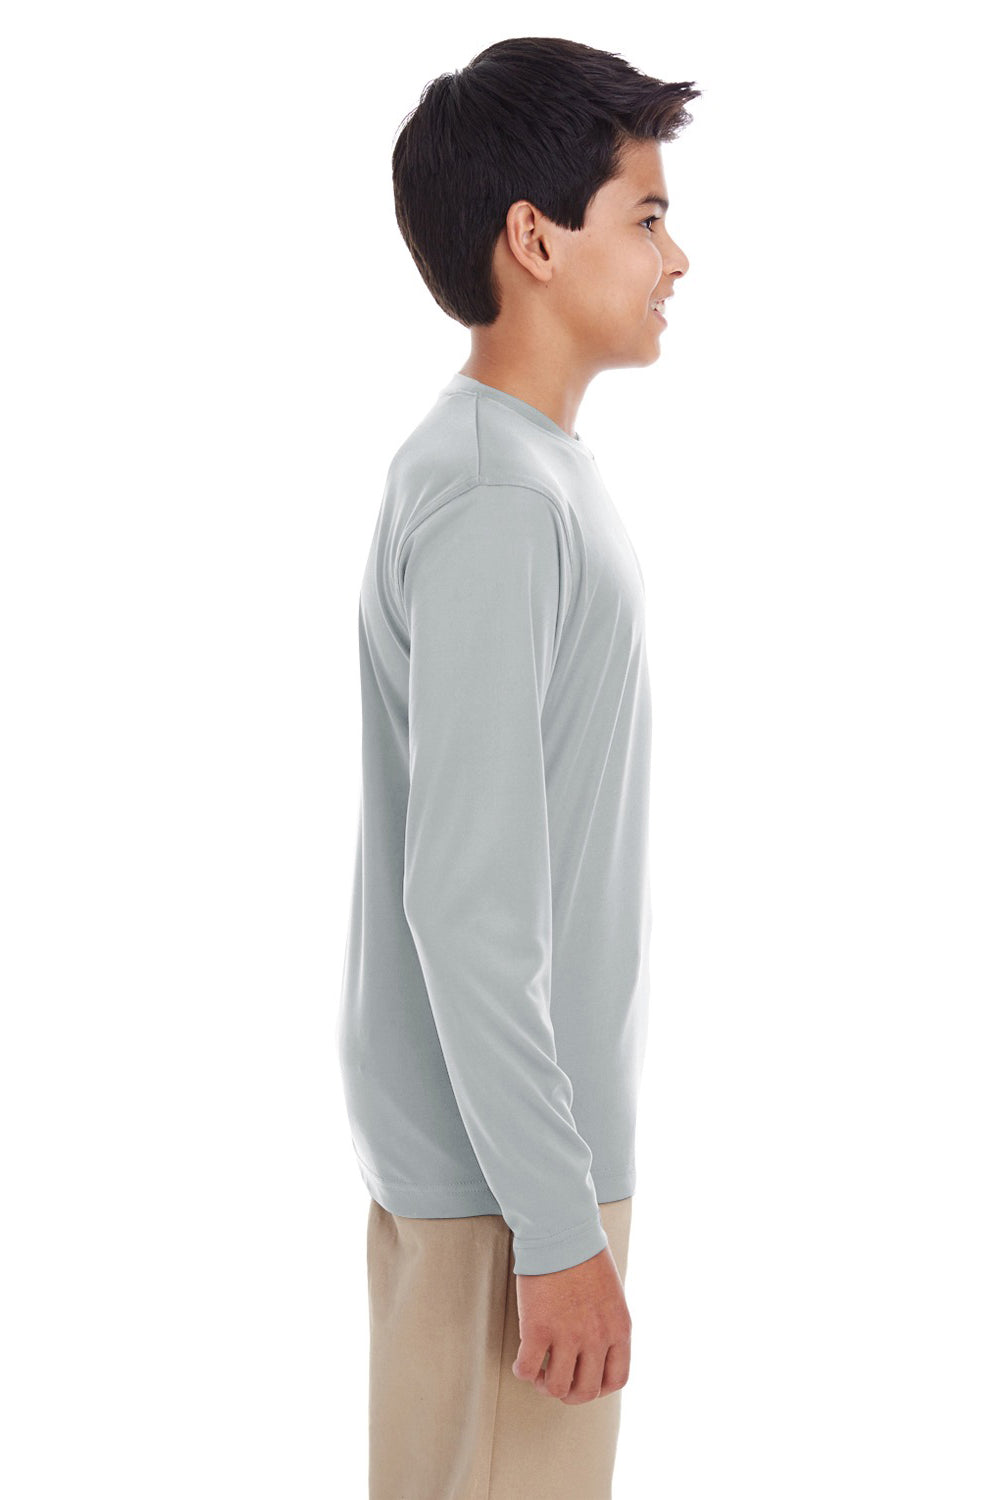 UltraClub 8622Y Youth Cool & Dry Performance Moisture Wicking Long Sleeve Crewneck T-Shirt Grey Side